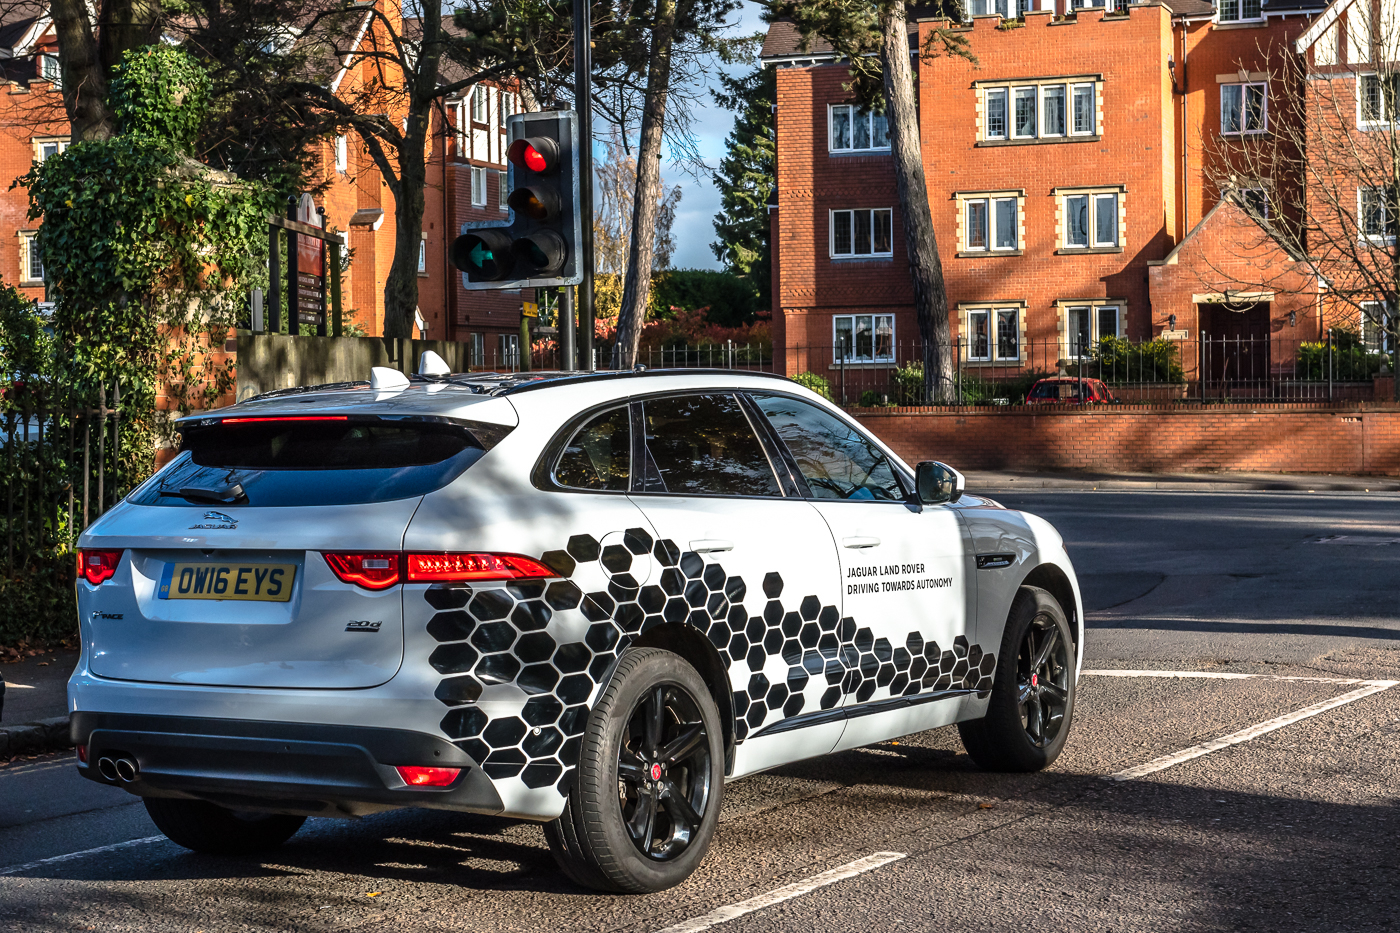 The project is funded by the Government’s £100m Connected and Autonomous Vehicle fund, delivered by Innovate UK and is worth a total of £7.1m.